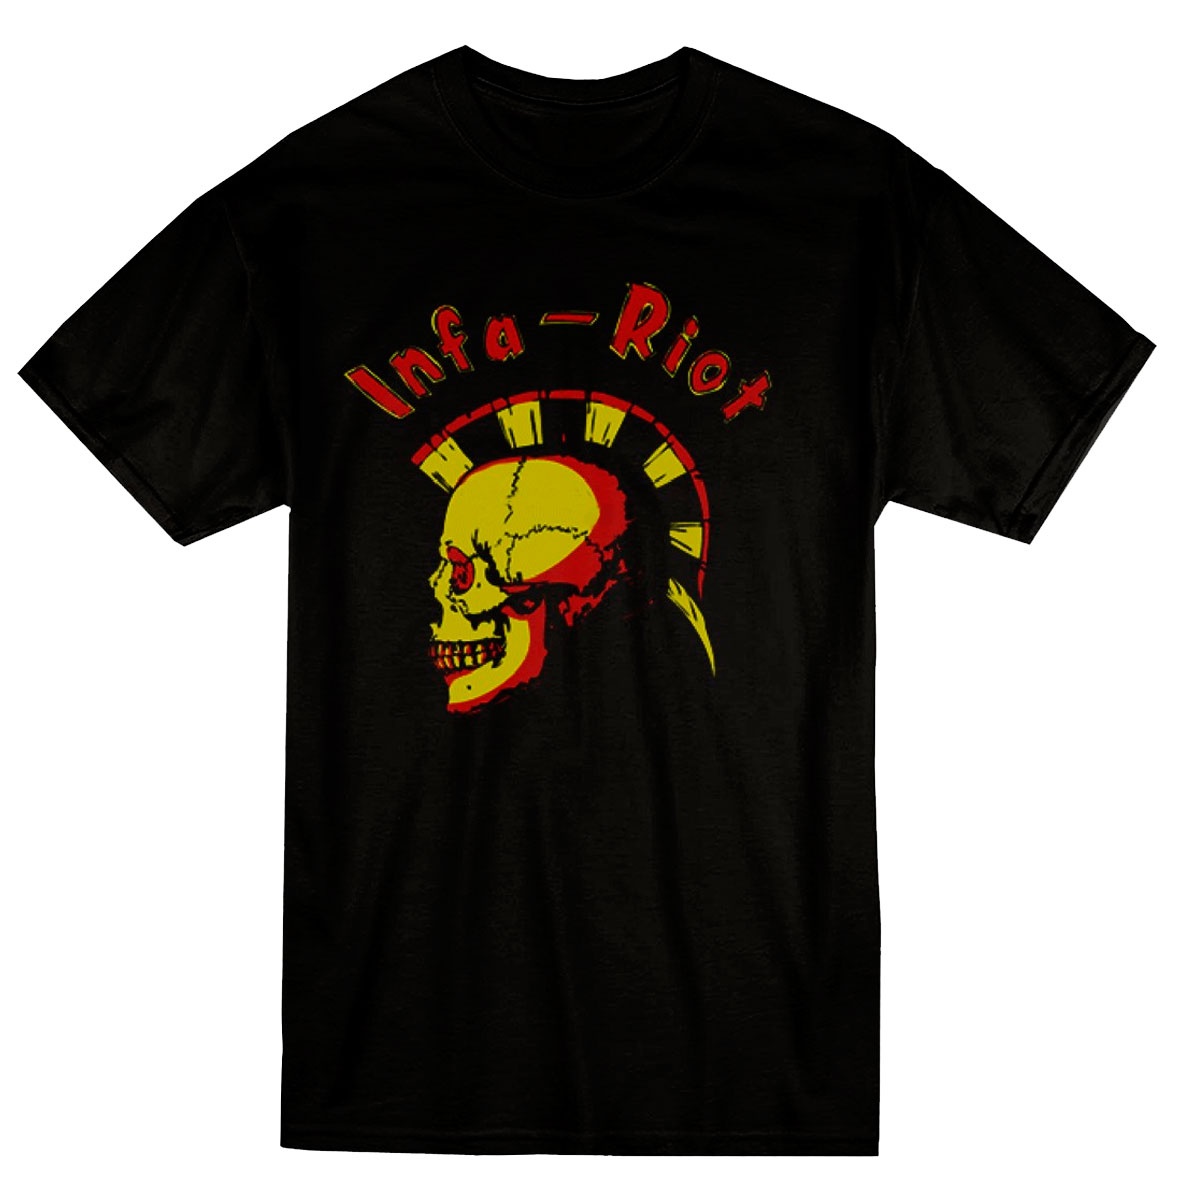 INFA RIOT In for a Riot T-shirt / Camiseta